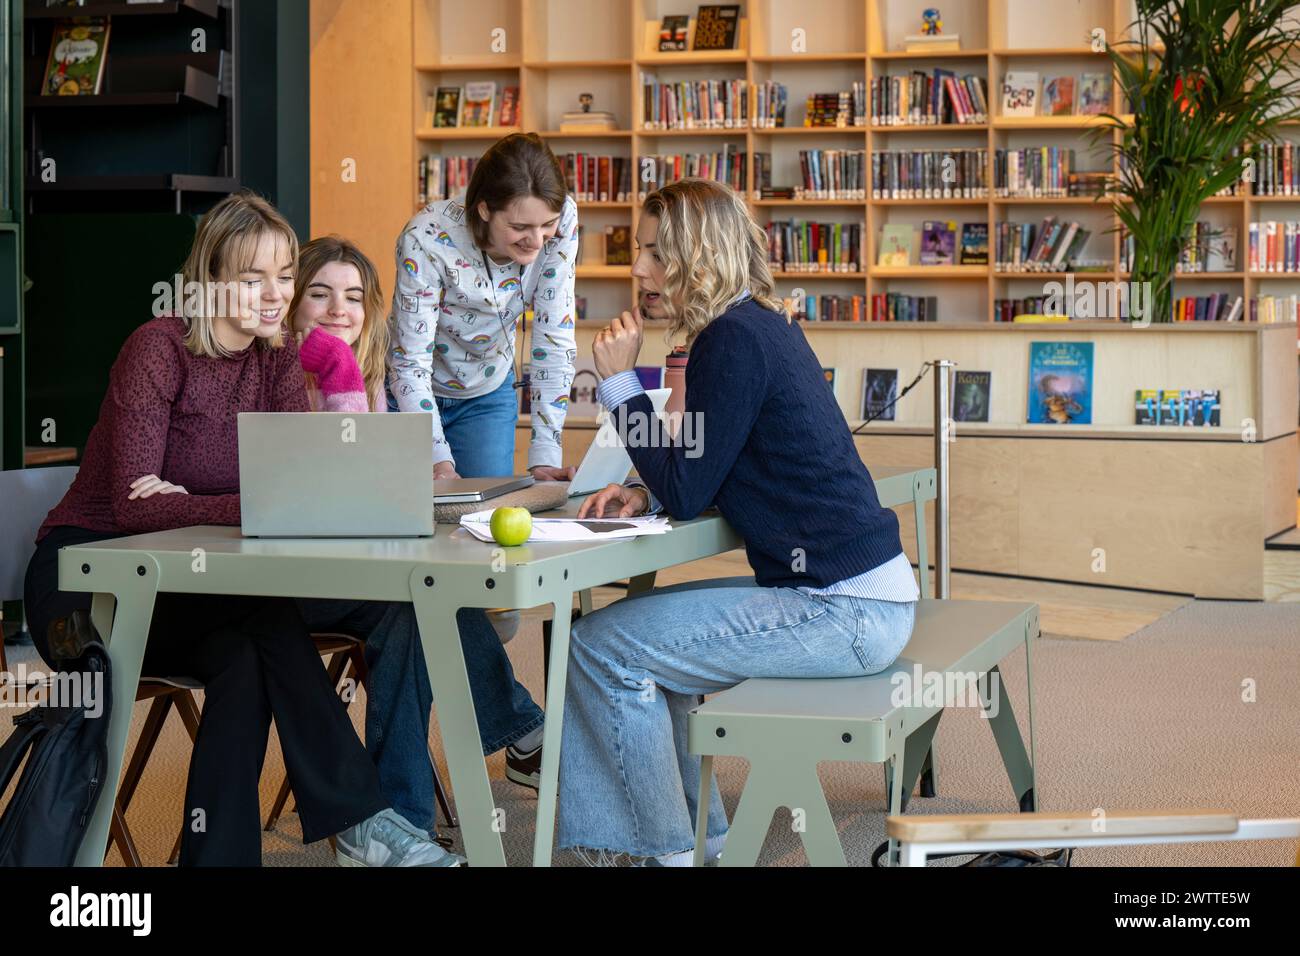 A group of students collaboratively working on a project in a modern library setting. Stock Photo